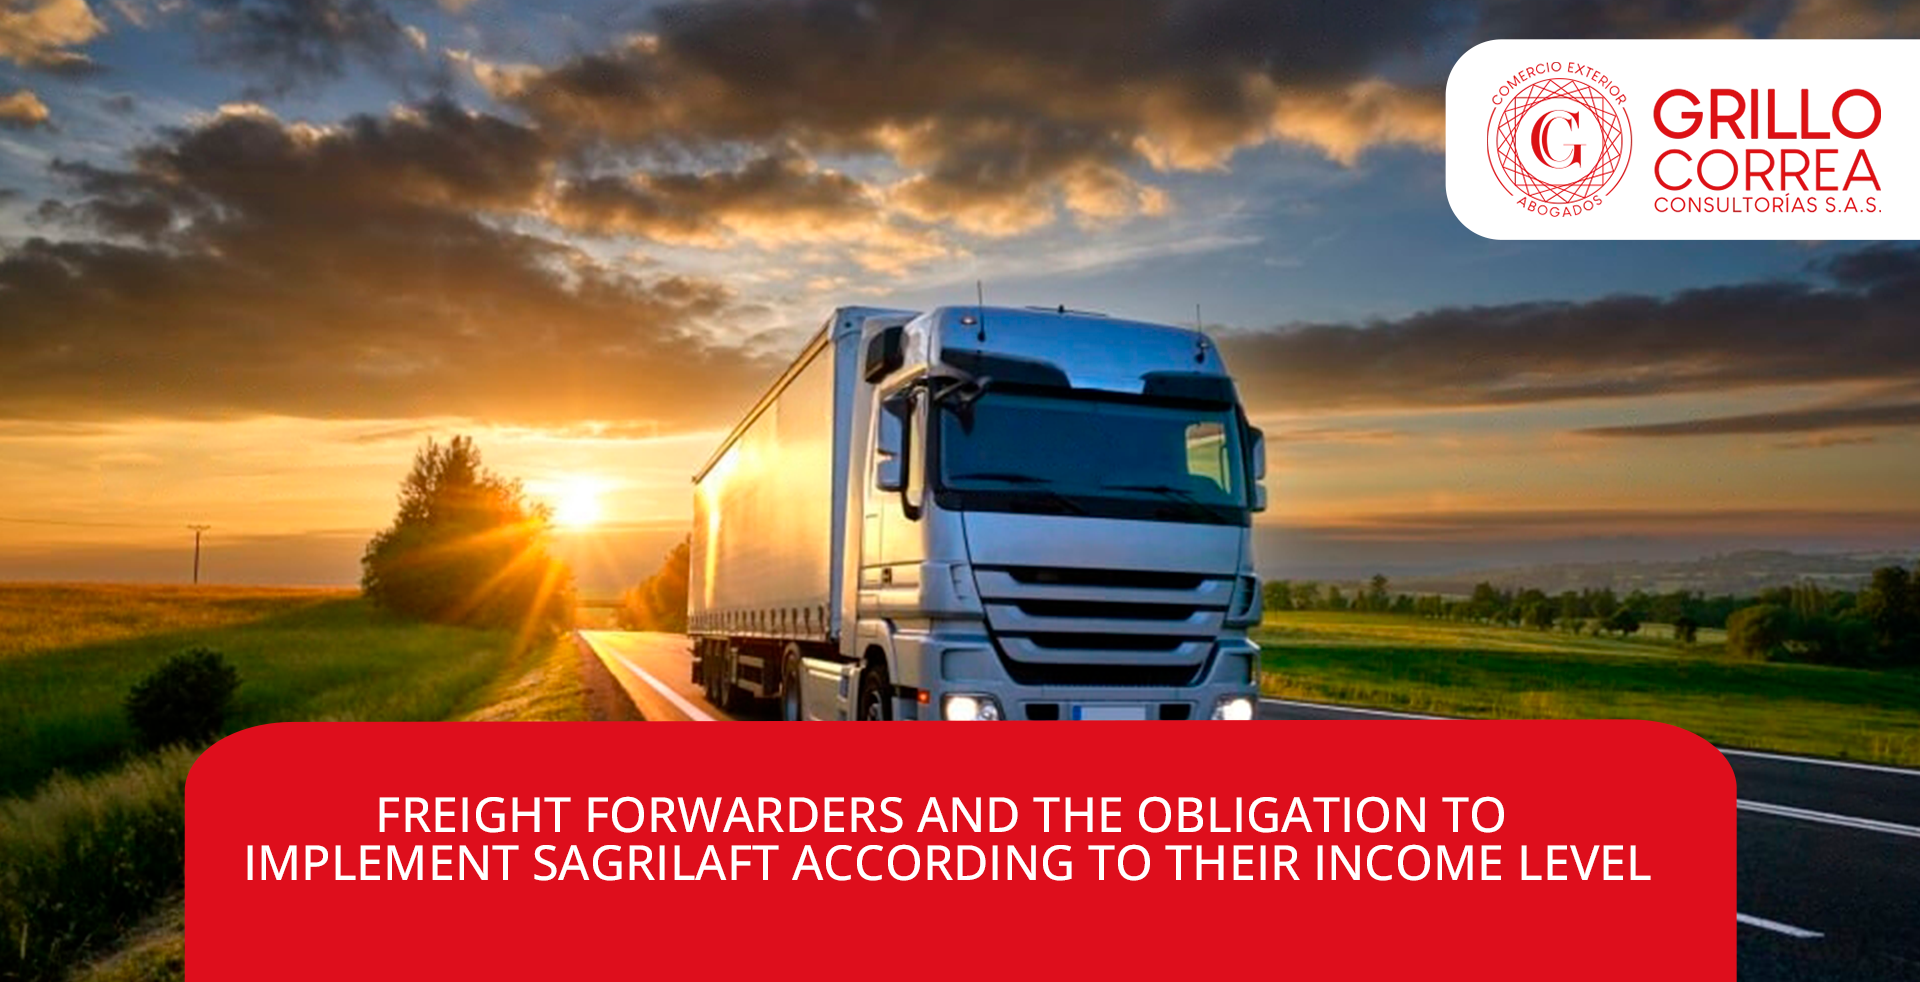 FREIGHT FORWARDERS AND THE OBLIGATION TO IMPLEMENT SAGRILAFT ACCORDING TO THEIR INCOME LEVEL